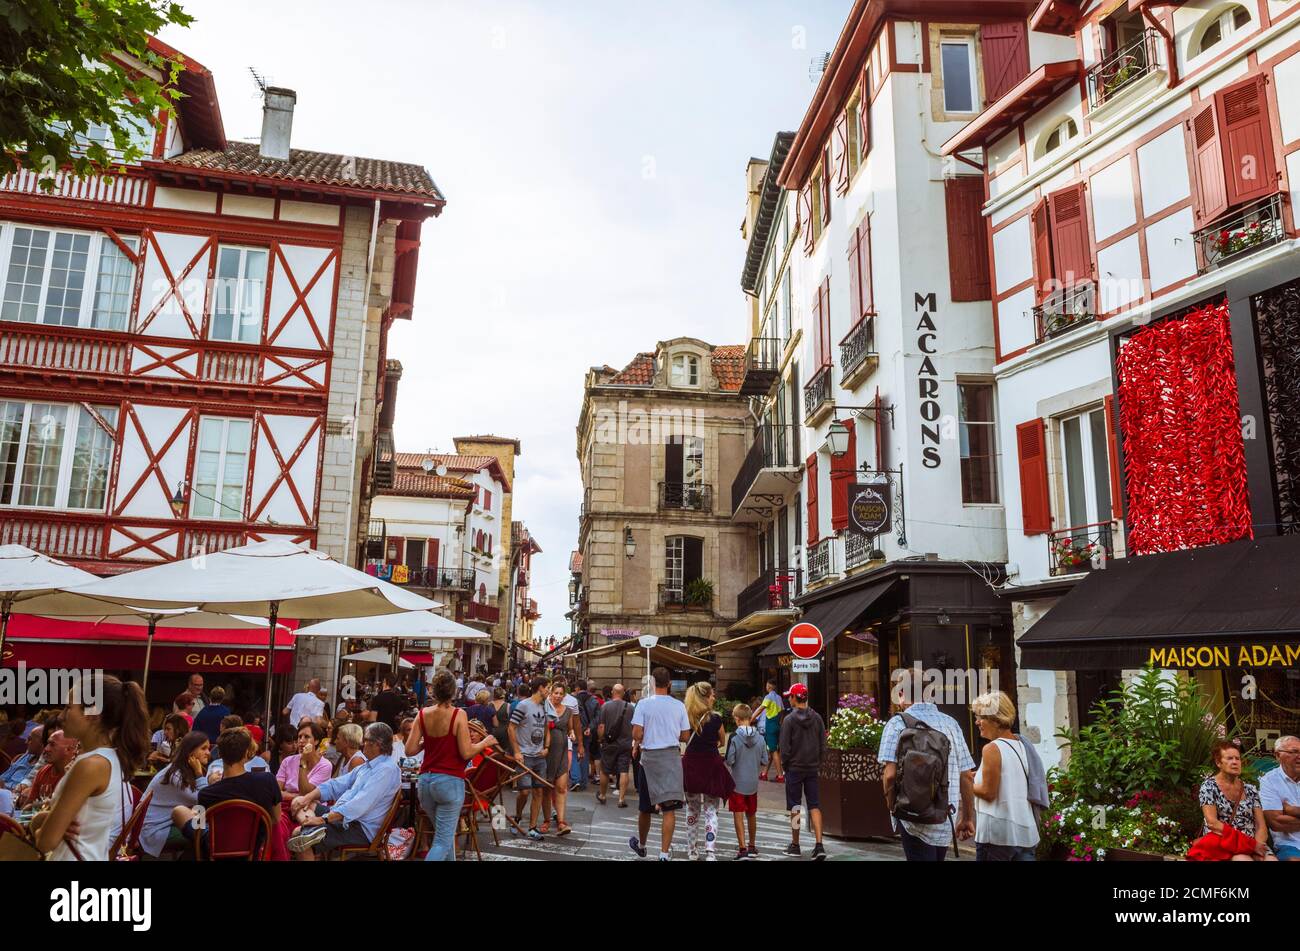 Saint Jean de Luz, French Basque Country, France - July 13th, 2019 : People walk in the Place Louis XIV square in the historic center of Saint Jean de Stock Photo